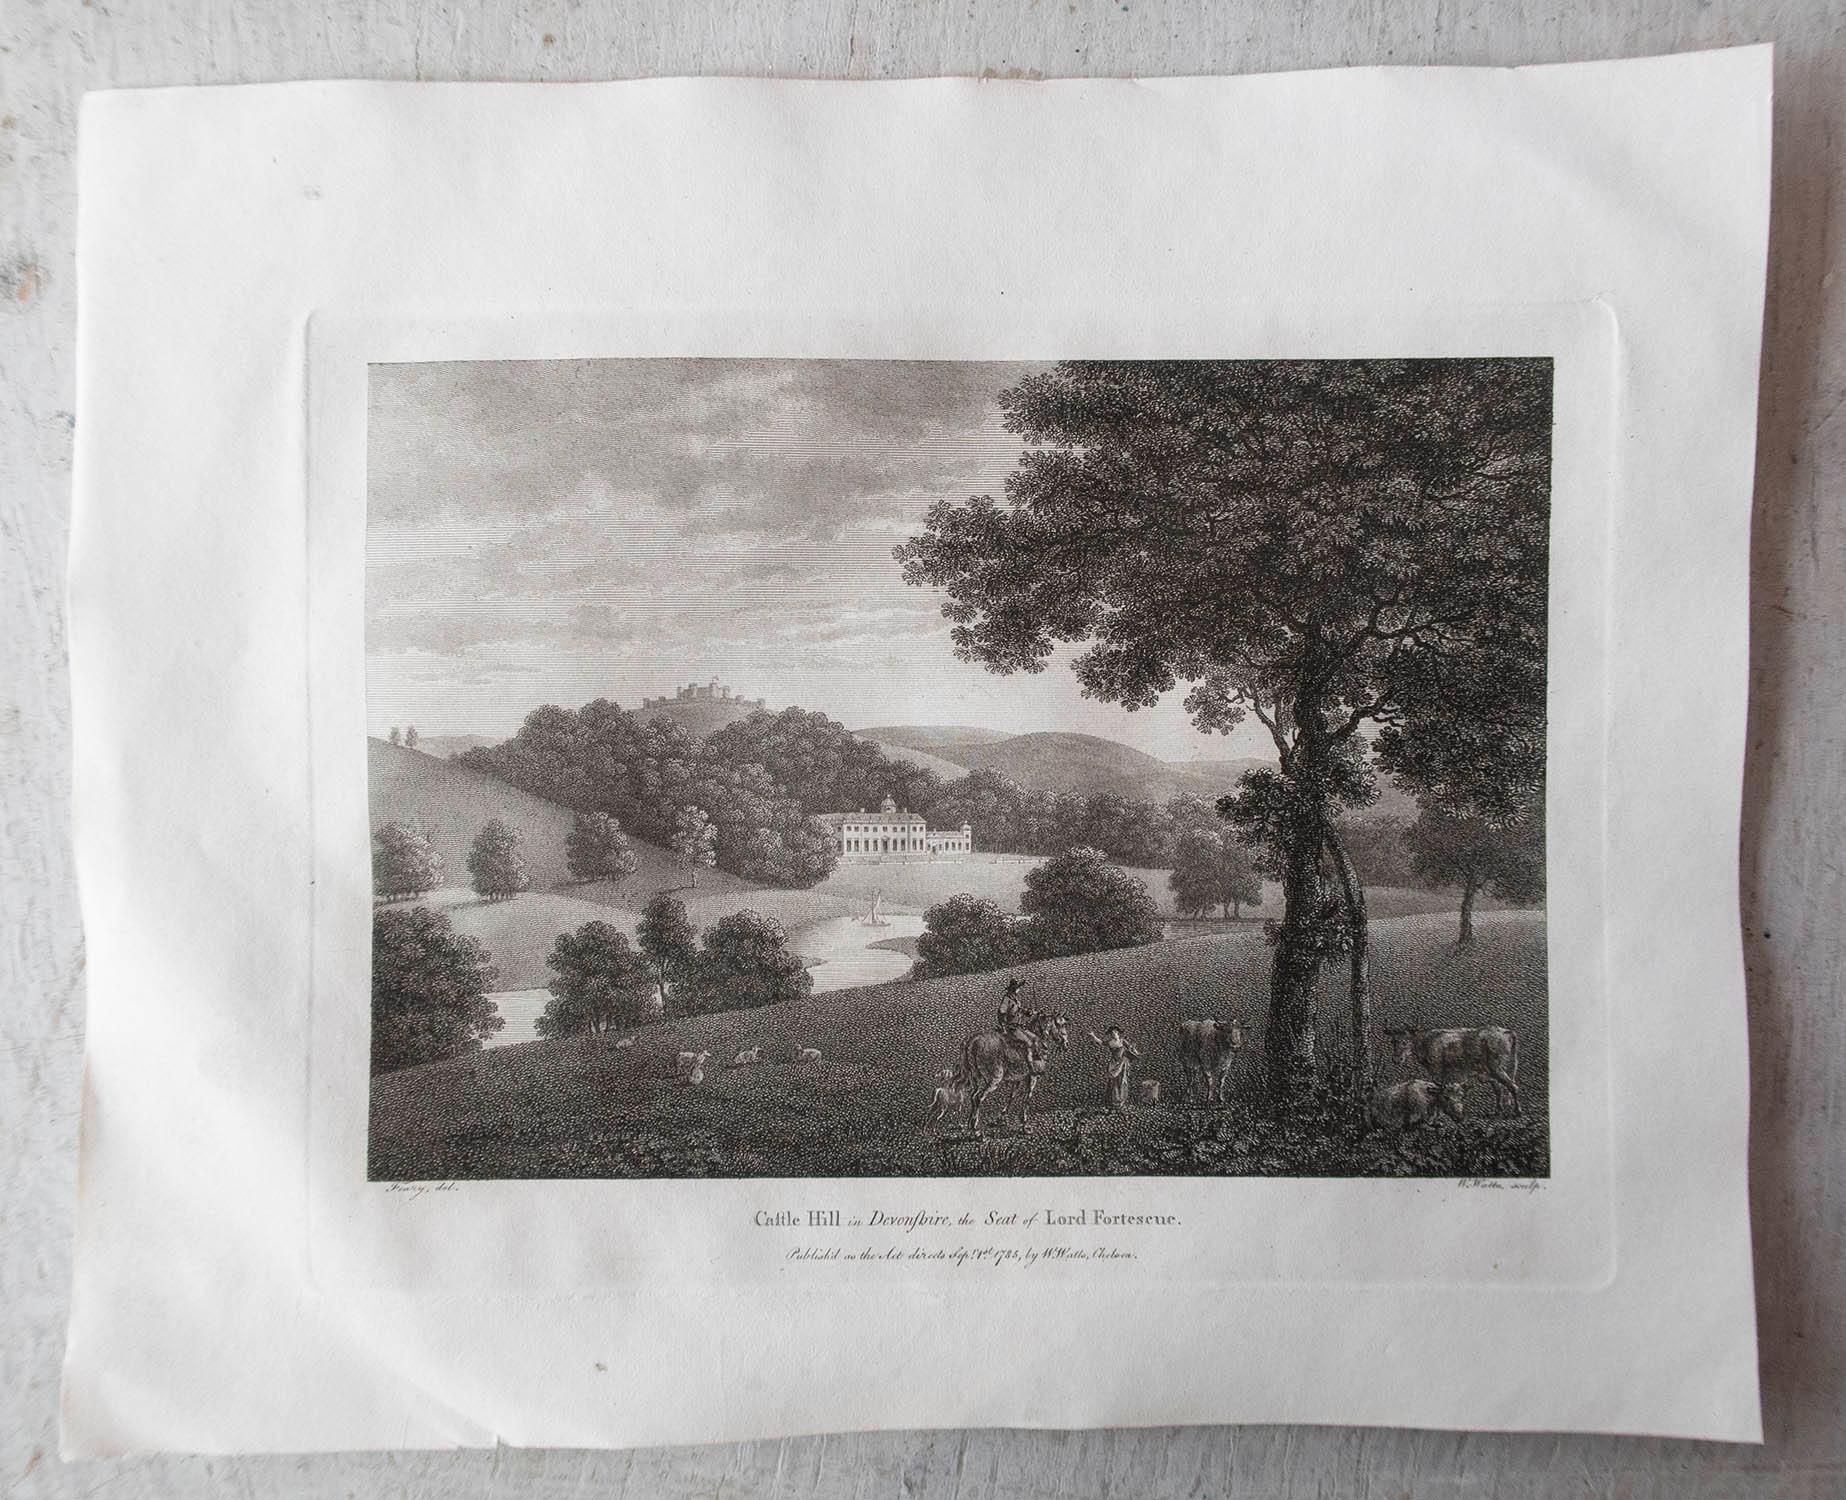 Georgian Set of 20 Original Antique Prints of English Country Houses and Gardens, C.1780 For Sale